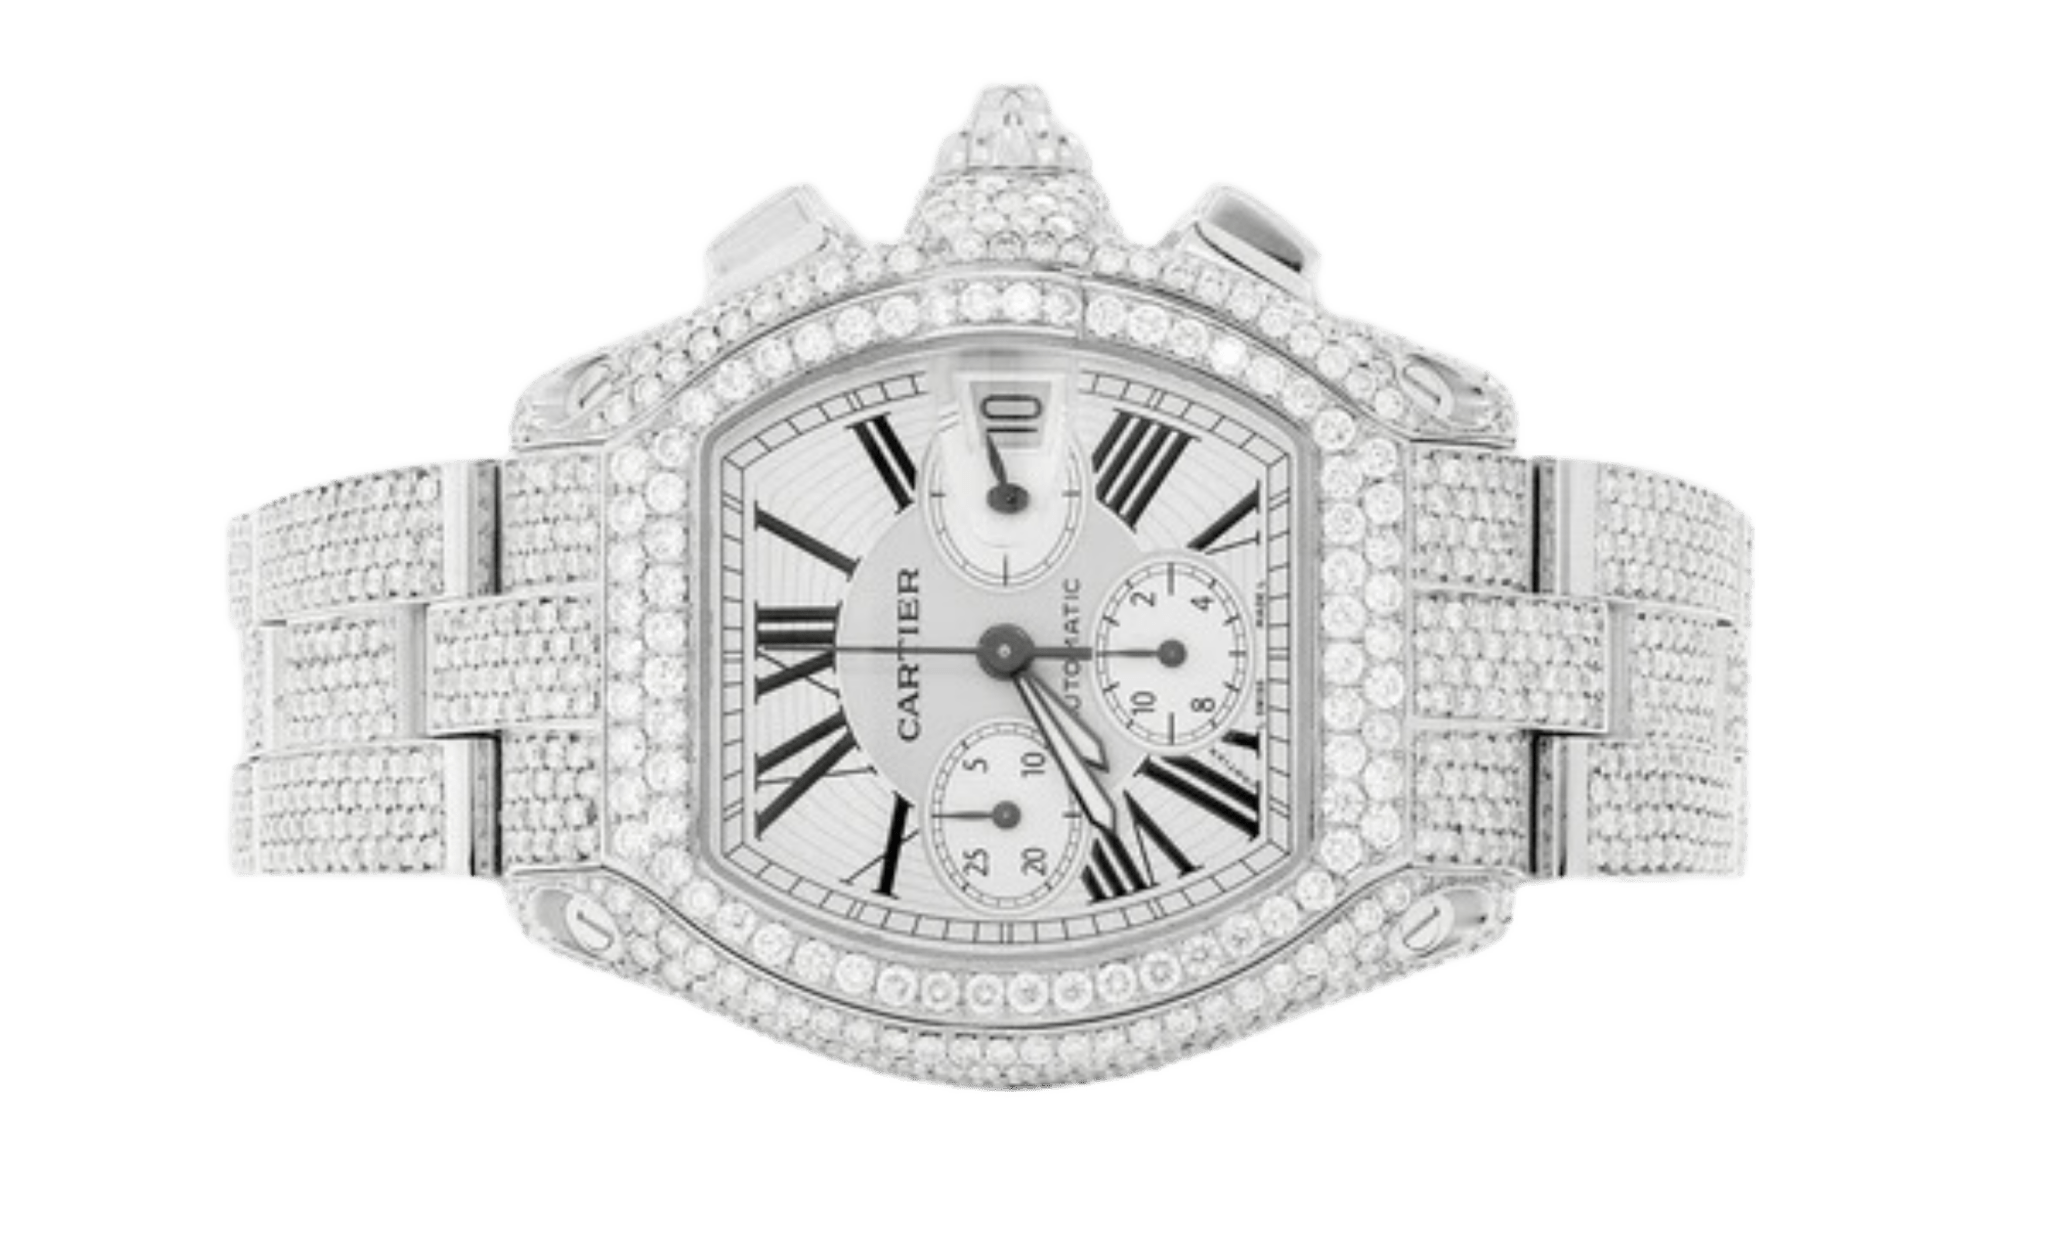 Custom Cartier Chronograph in Steel with White Diamonds - 41MM - Superior Stirling